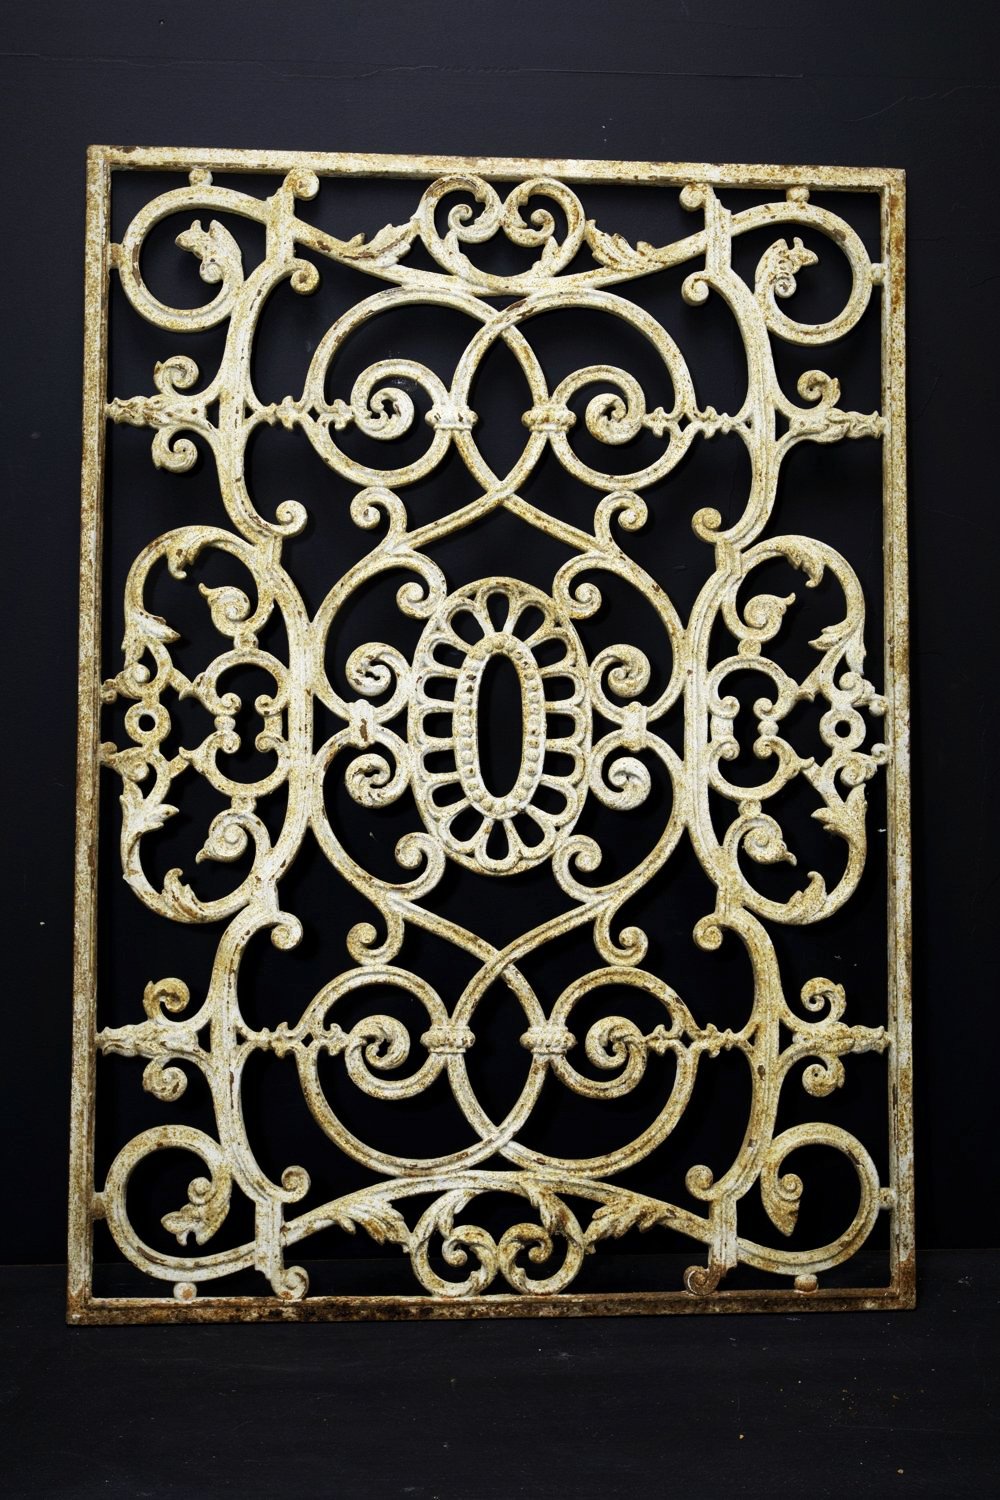 French Wrought Wrought Iron Grill -No 16